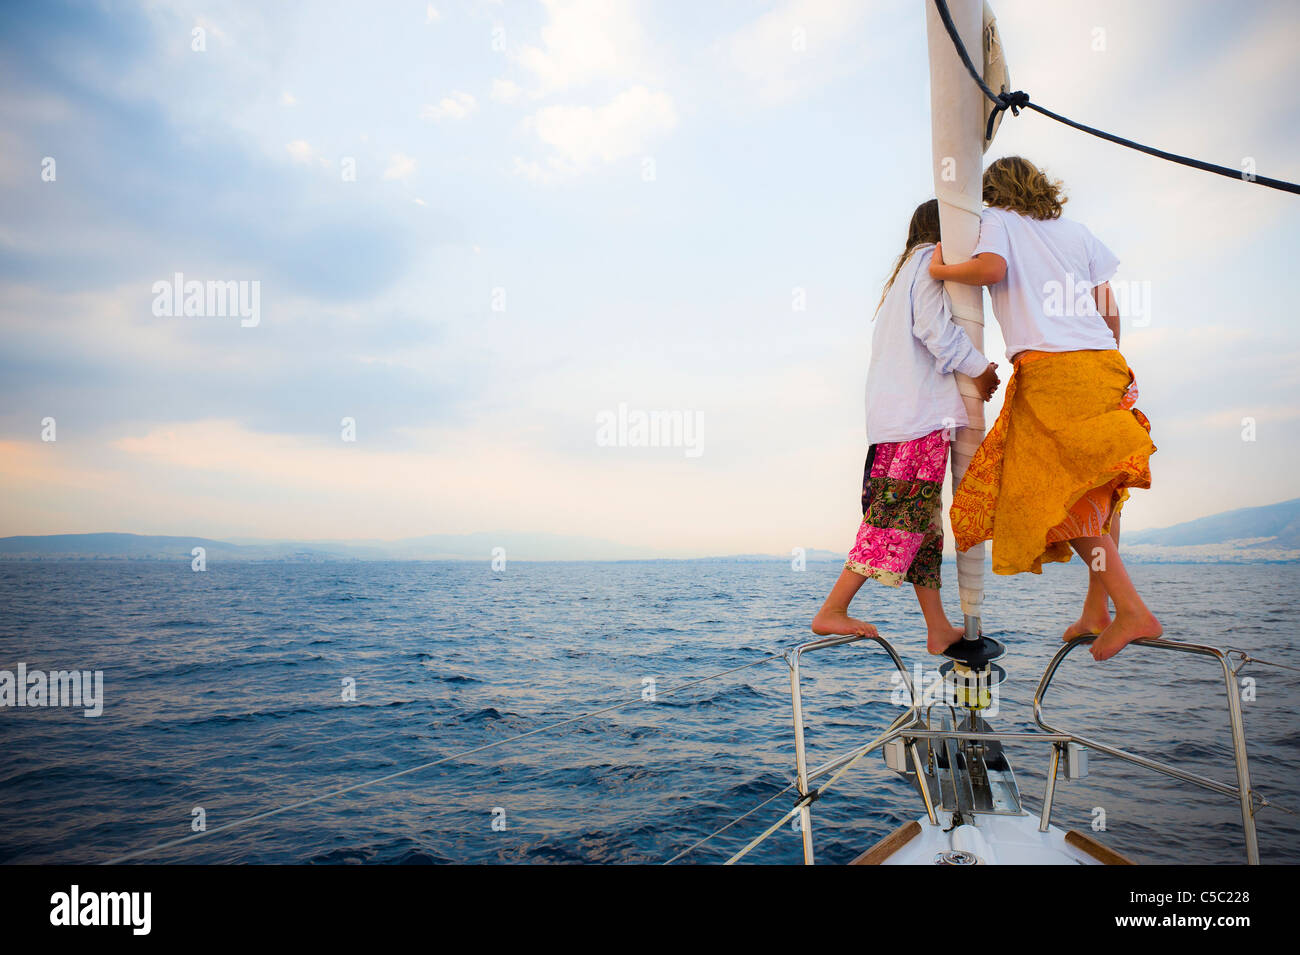 Rear view of two girls on pulpit in sailboat looking at the sea Stock Photo